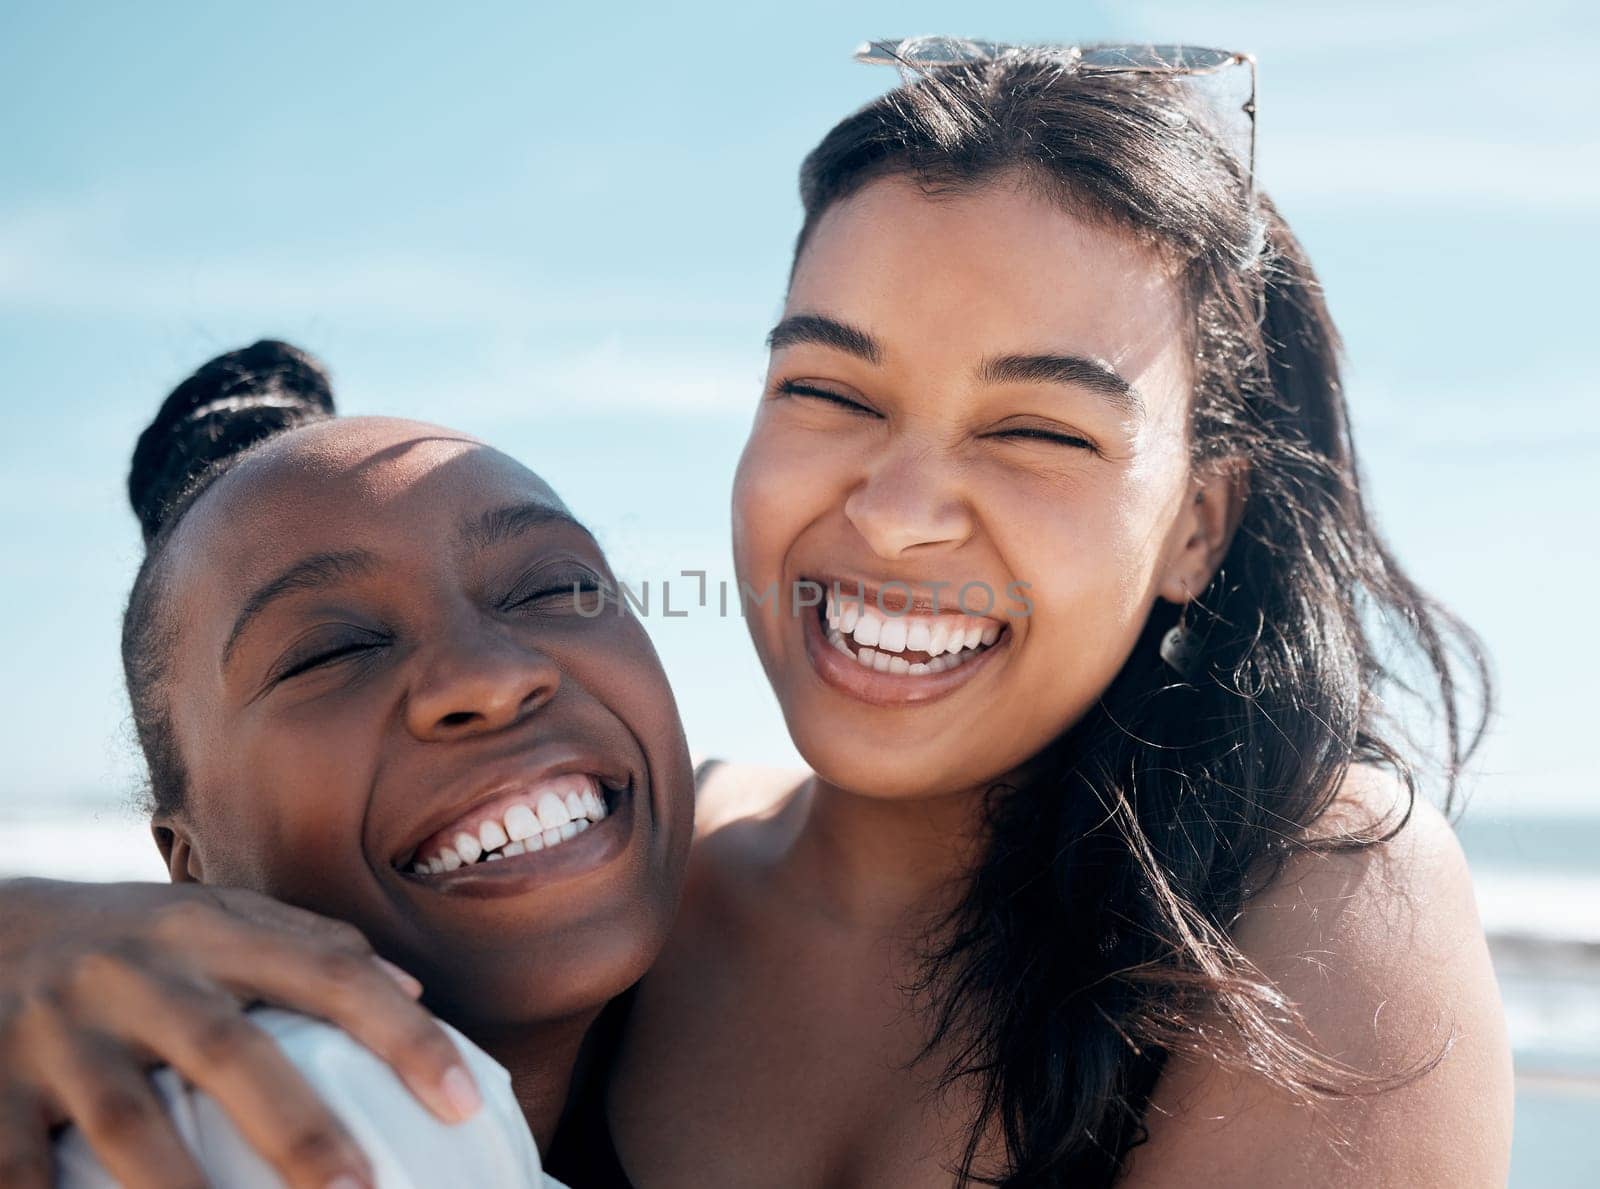 Woman, friends and hug with smile for beach day, summer vacation or travel together outdoors. Portrait of happy women laughing in joy for friendship, travel or fun holiday bonding by the ocean coast by YuriArcurs